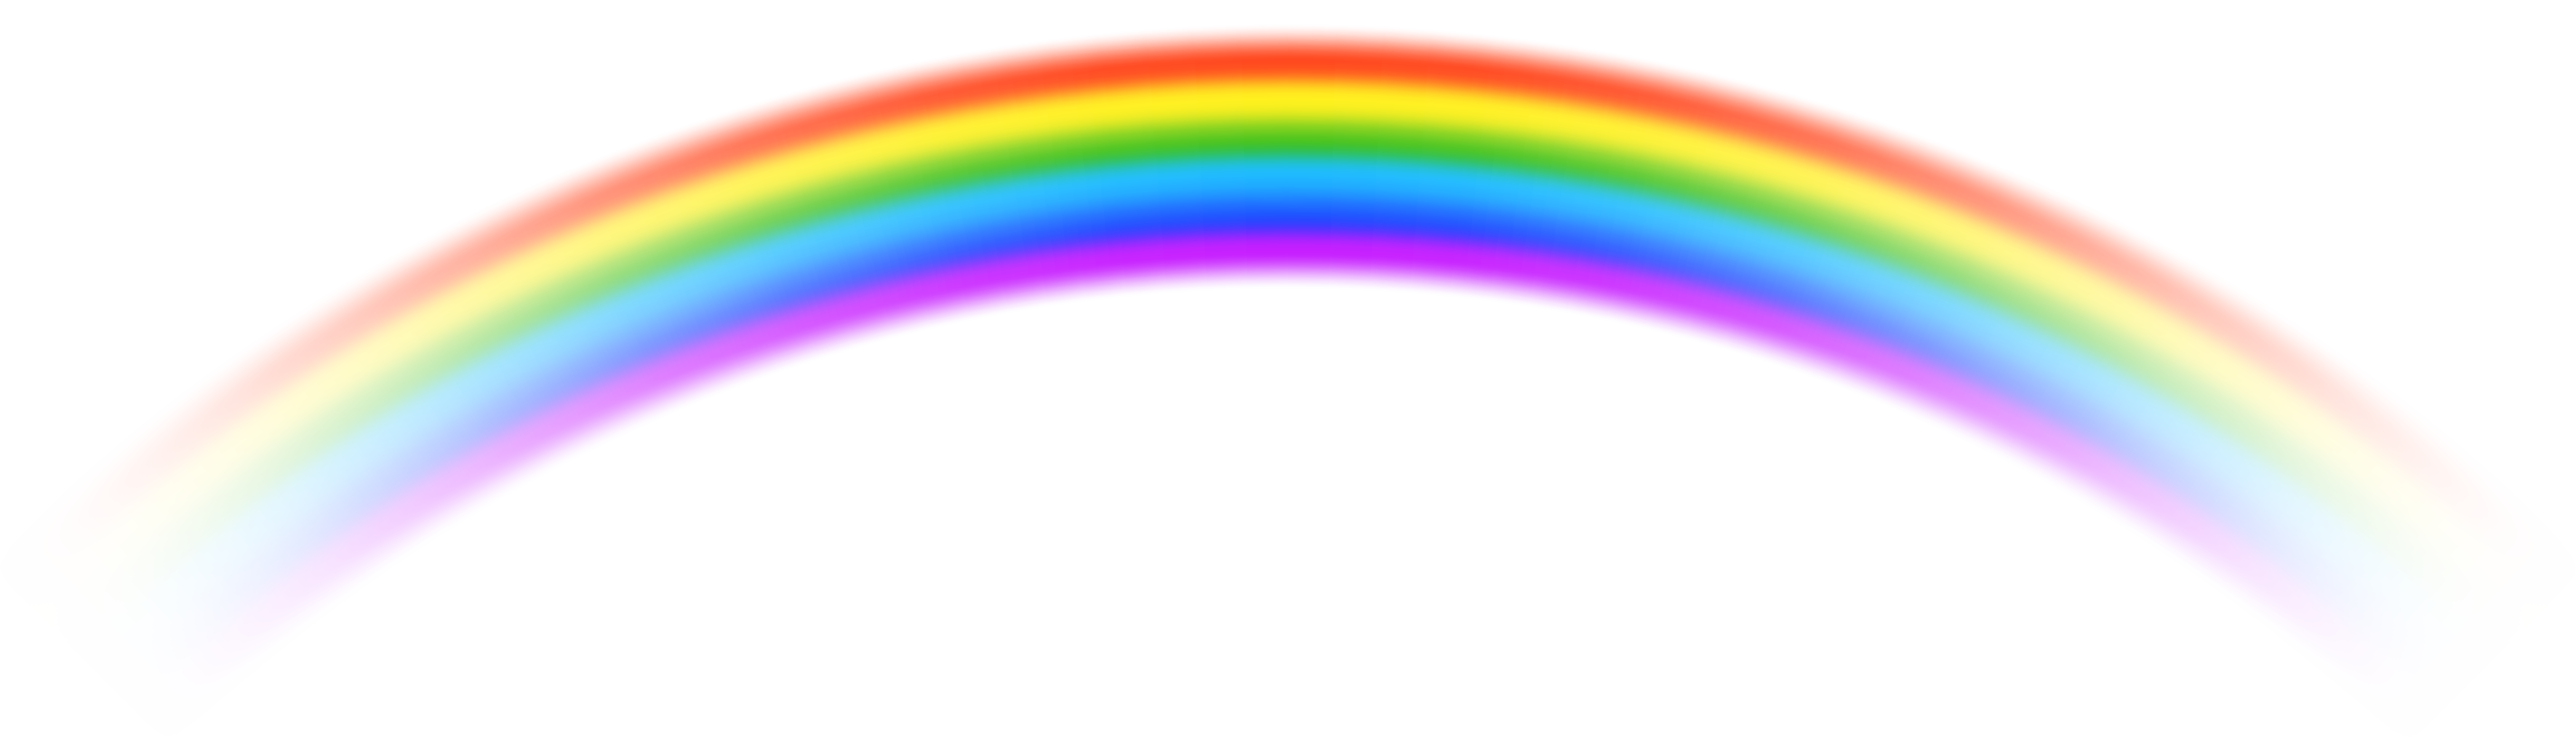 Flame clipart rainbow. Png free clip art